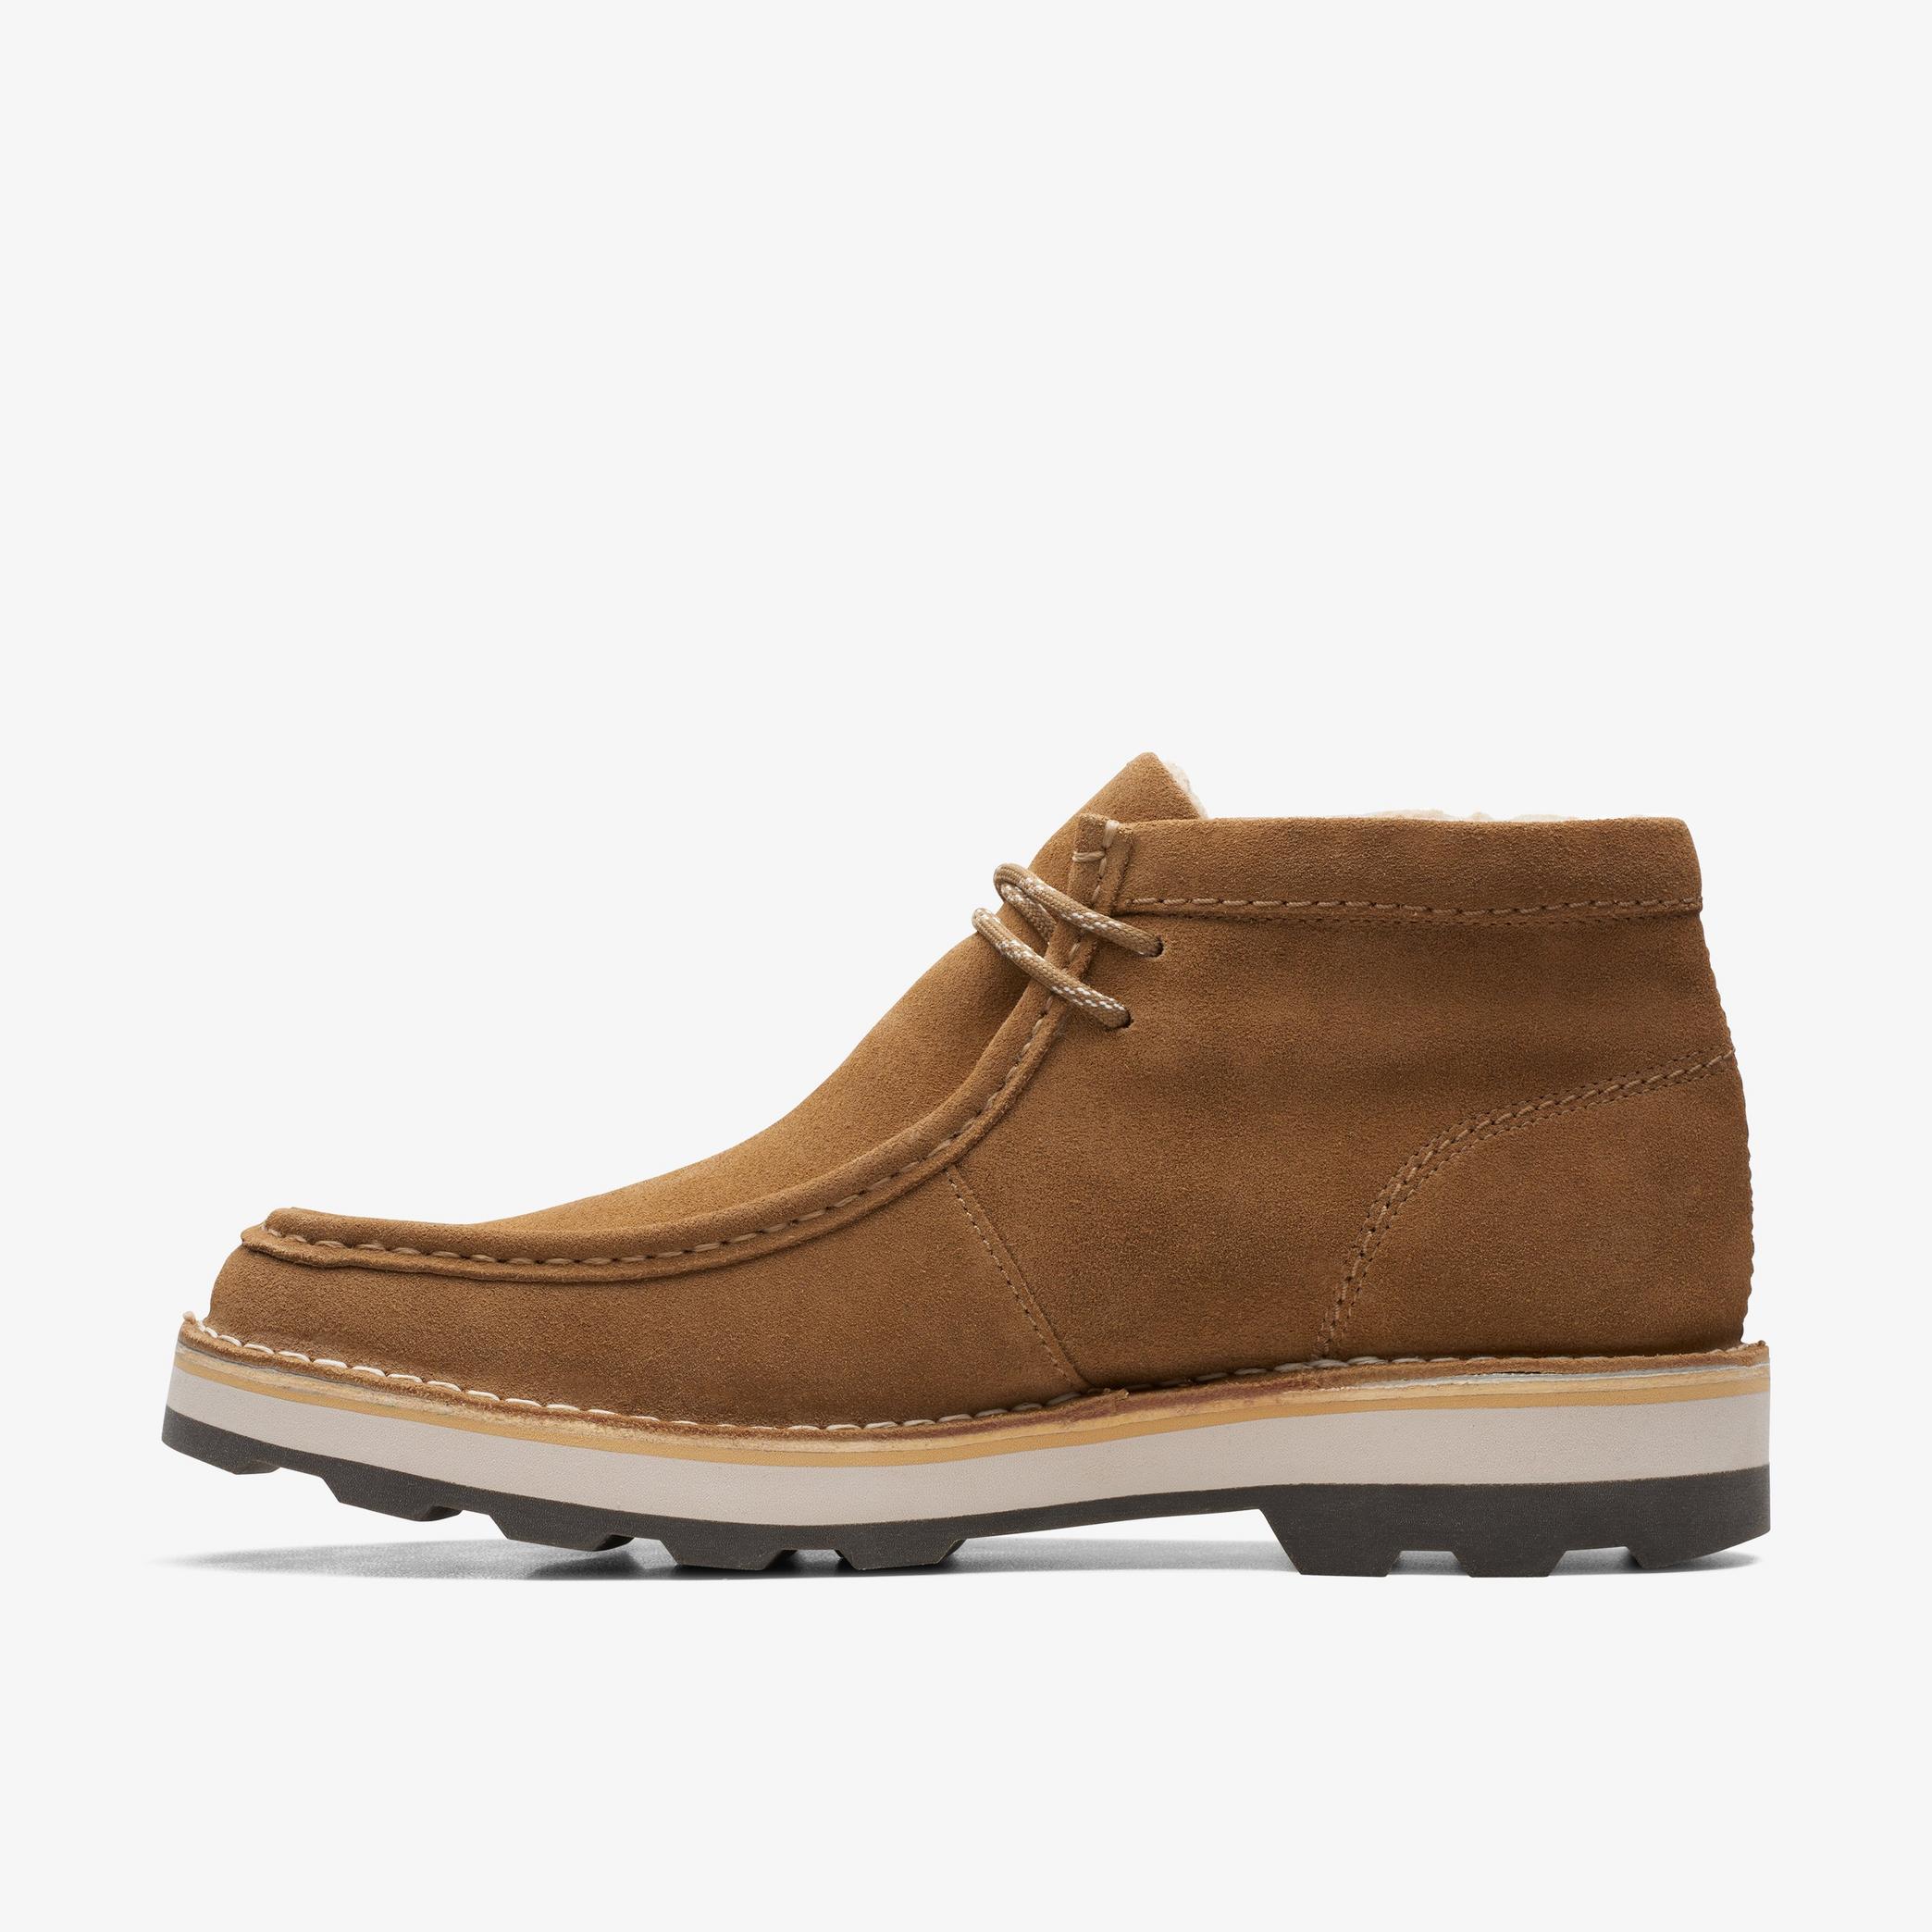 MENS Corston Wally Waterproof Dark Sand Warmlined Ankle Boots | Clarks US